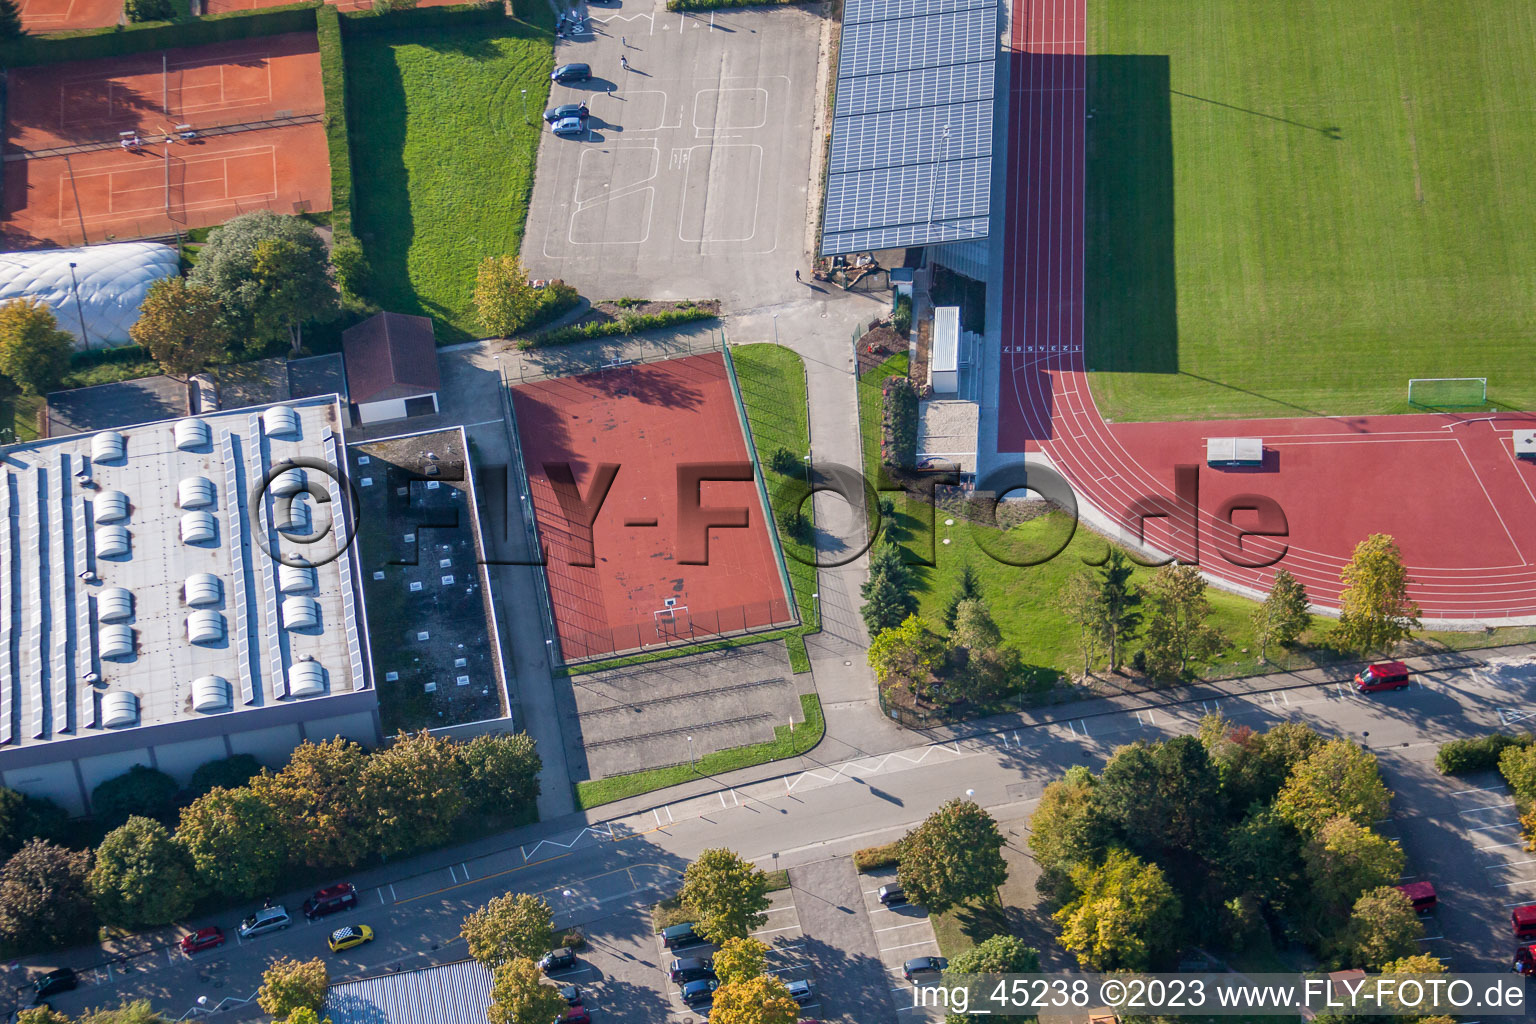 Sports grounds of SV-1899 eV Langensteinbach in the district Langensteinbach in Karlsbad in the state Baden-Wuerttemberg, Germany from a drone